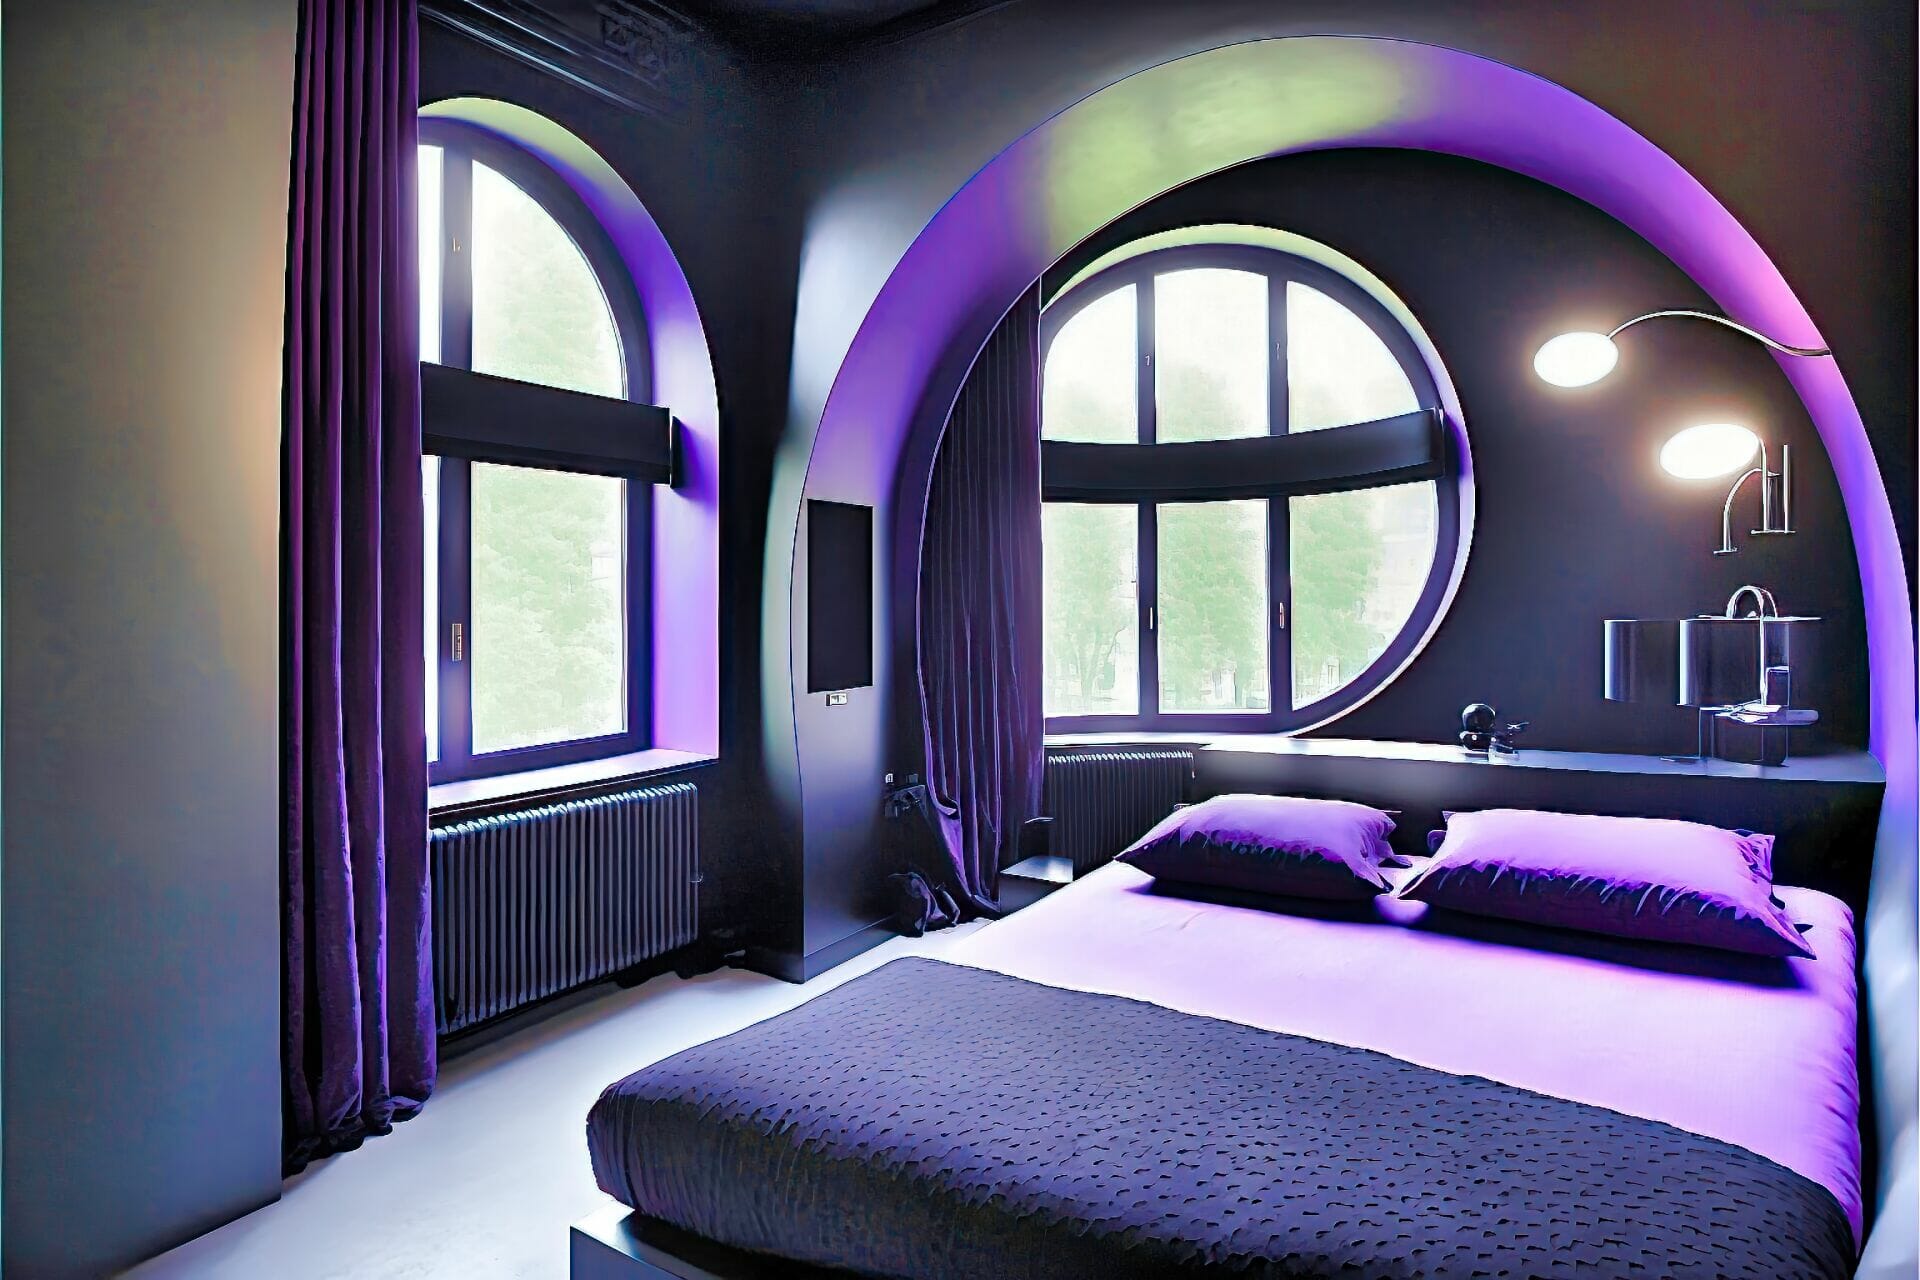 Bedroom With A Gothic, High-Tech Feel. The Walls Are Painted A Deep Purple, With Black Accents. The Center Of The Room Features A Large, Sleek Black Bed, With A Matching Bed Frame And Nightstands. The Lighting Is Low And Ambient, With A Light Strip Running Along The Walls, And A Gothic-Style Chandelier With Multiple Led Bulbs Providing Ambient Lighting. The Floor Is An Industrial Black Tile With A Glossy Finish. Several Gothic-Style Accessories, Such As A Robotic Arm Lamp, A Computer Console, And A Mirror With A Digital Display, Create A Dark And Mysterious Atmosphere. The Walls Are Adorned With Gothic Artwork, And The Overall Effect Is One Of Modern, High-Tech Luxury.